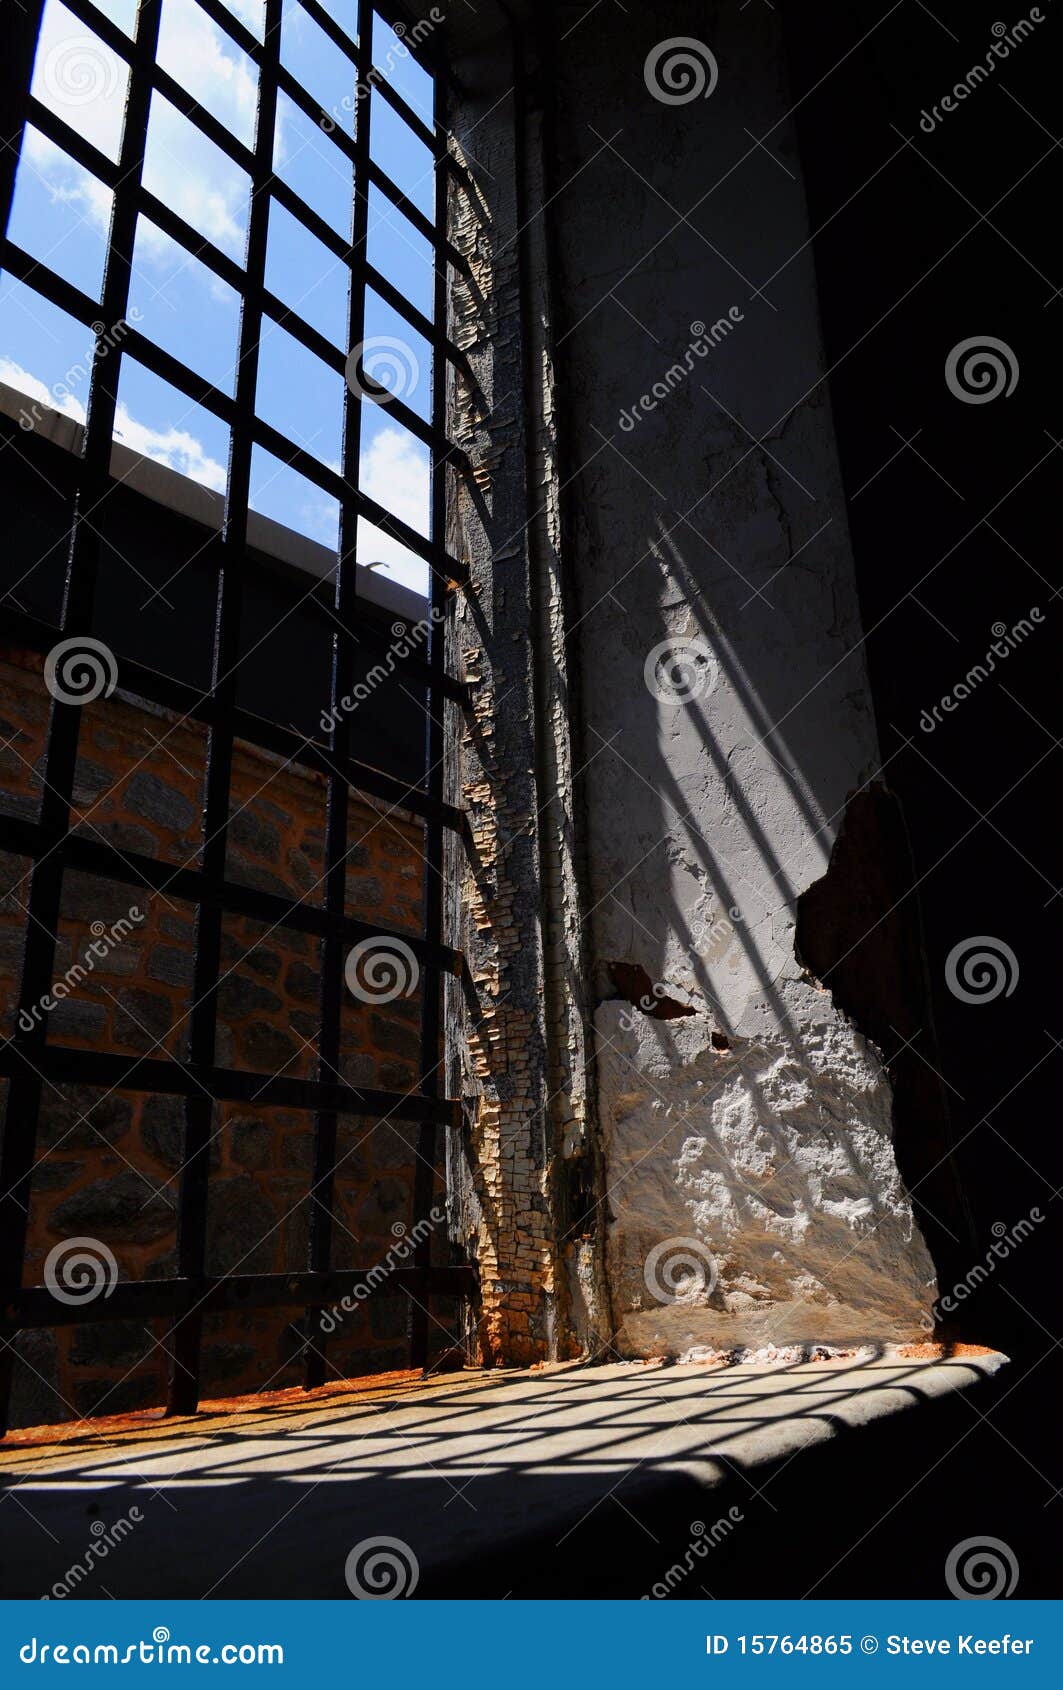 Royalty Free Stock Photo: Old window at Eastern State Penitentiary